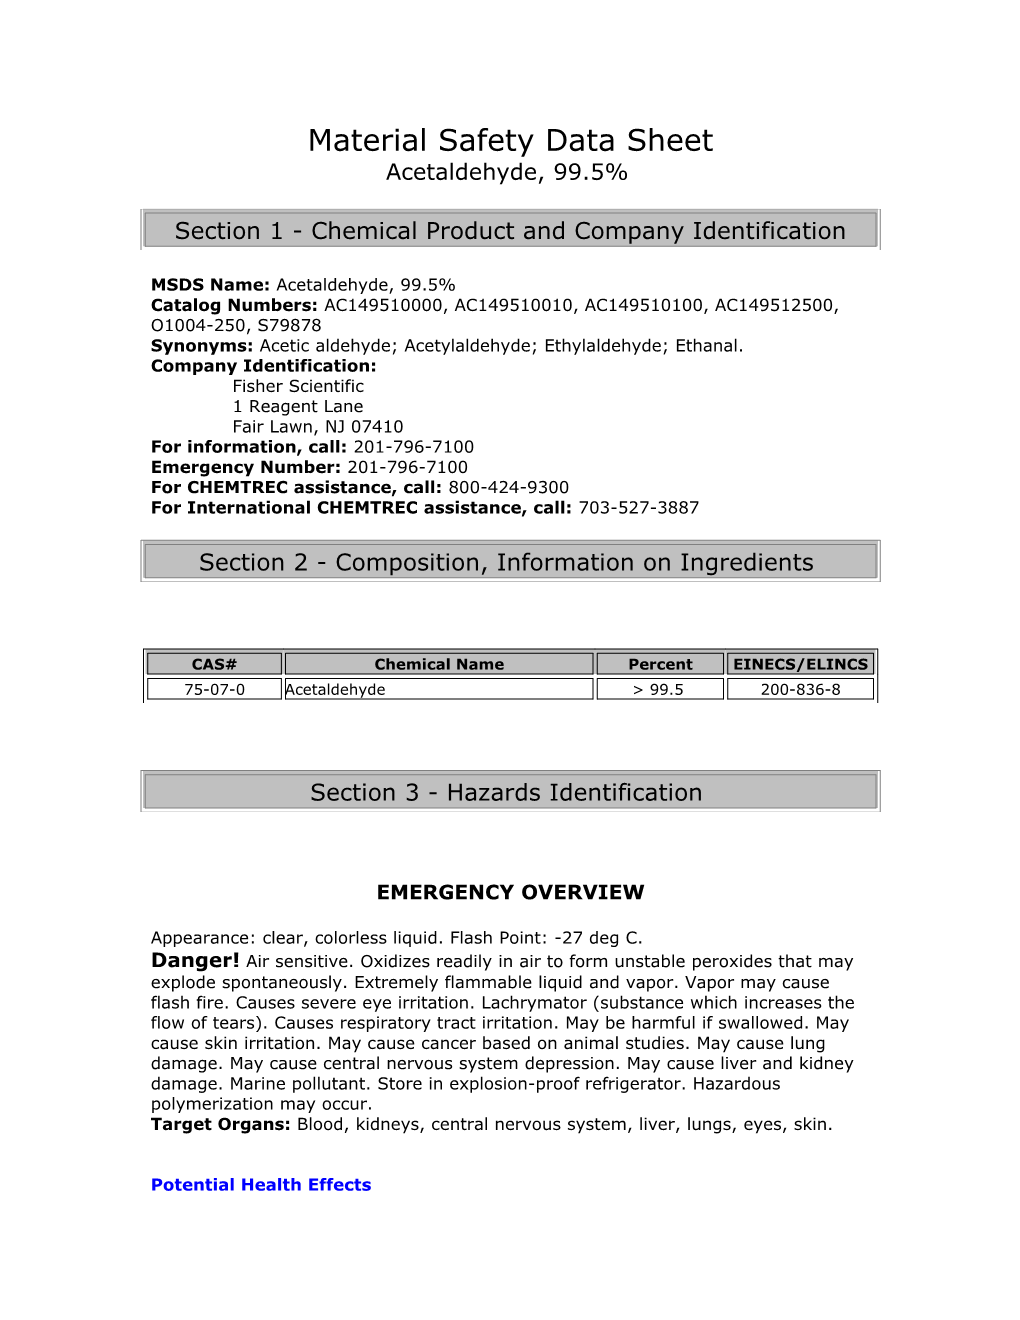 Material Safety Data Sheet s108